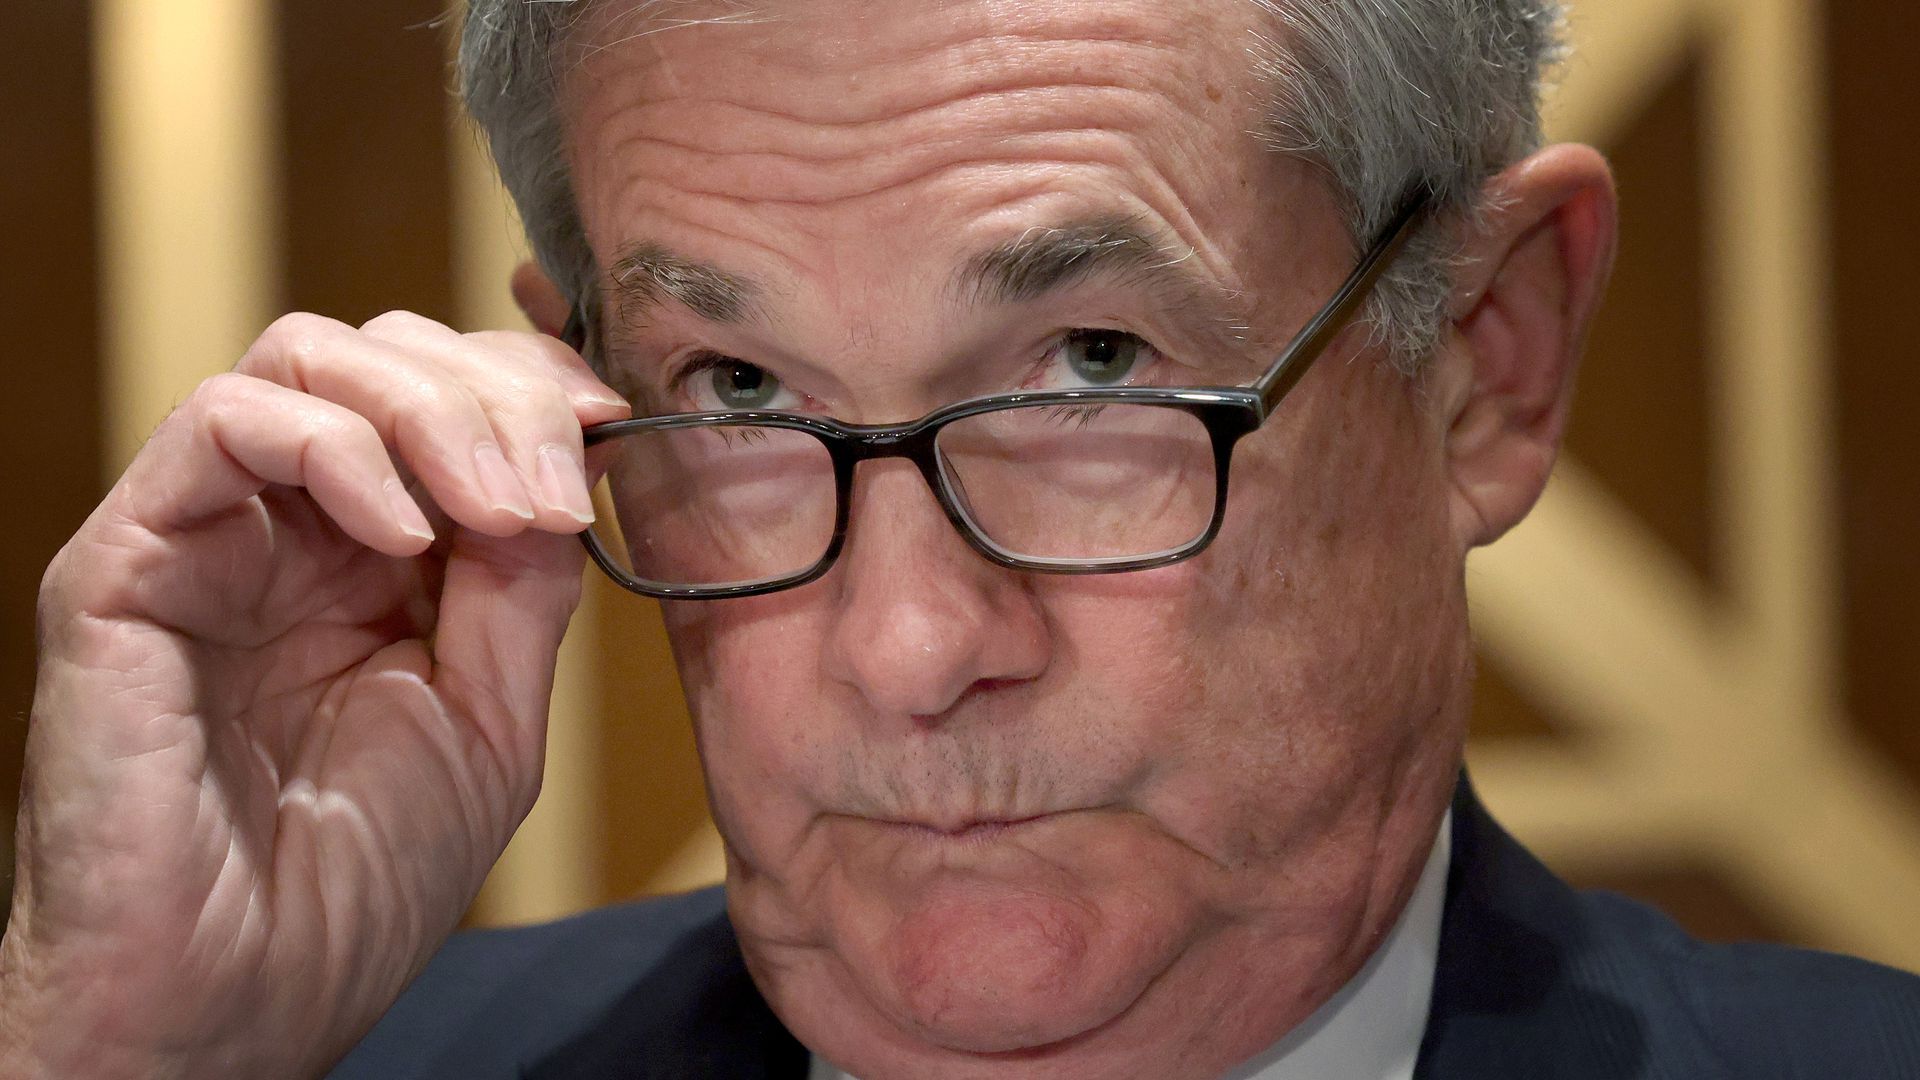 Image of Jerome Powell.